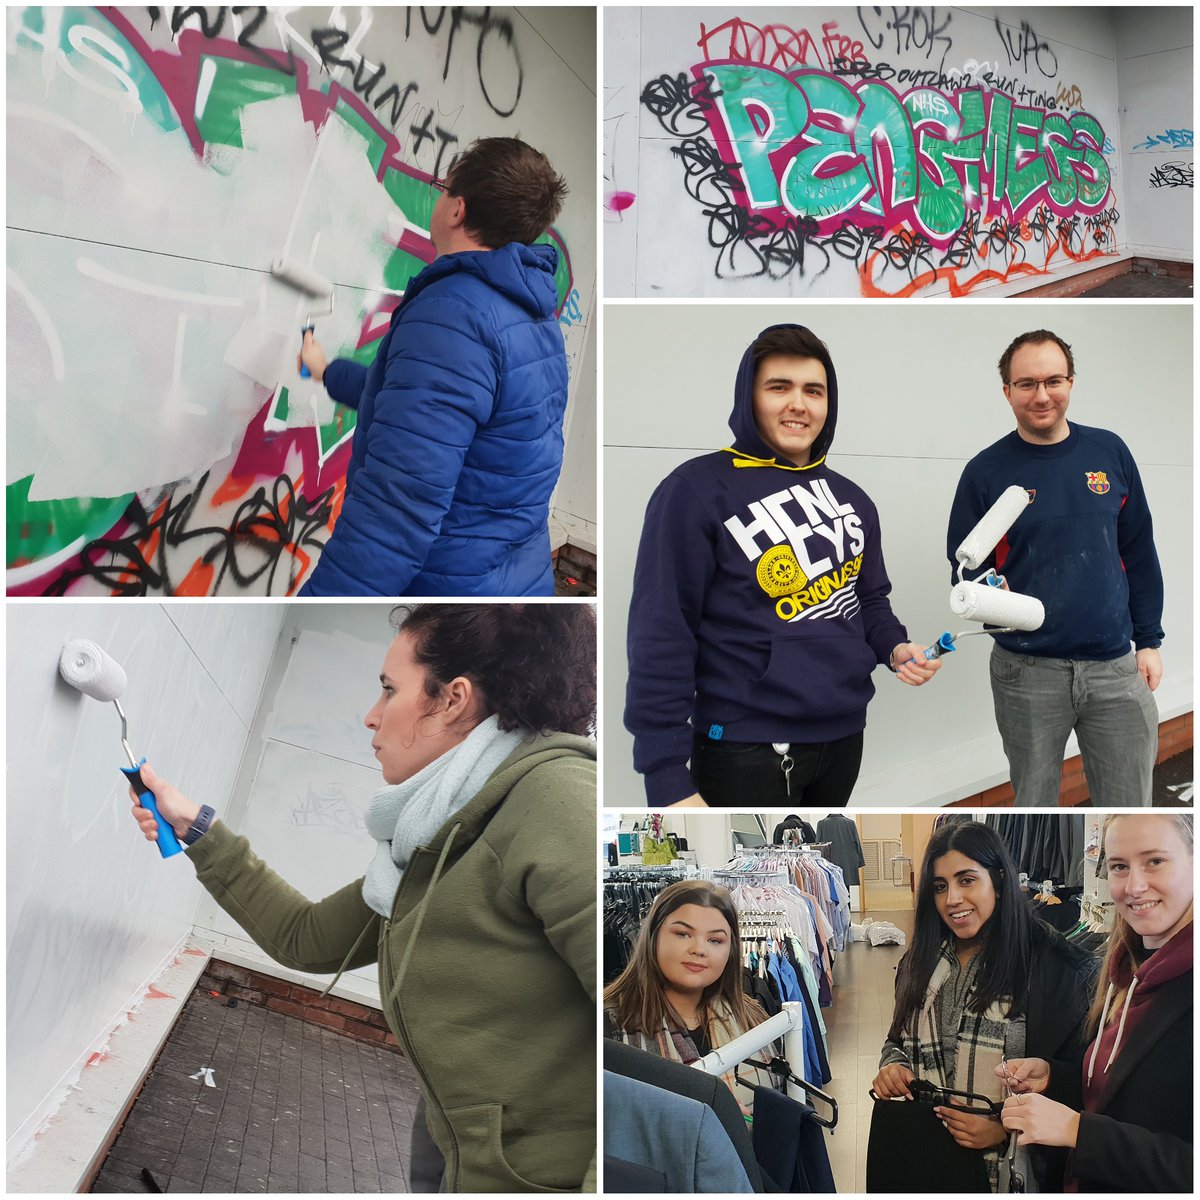 A massive thank you to a team of staff from @U2Diversity and @EHCareersGO who spent a volunteering day with us on Tuesday helping to paint over graffiti on our walls in the pouring raining also doing a great clean-up and sort in our centre ready for our busy year ahead. #CSR